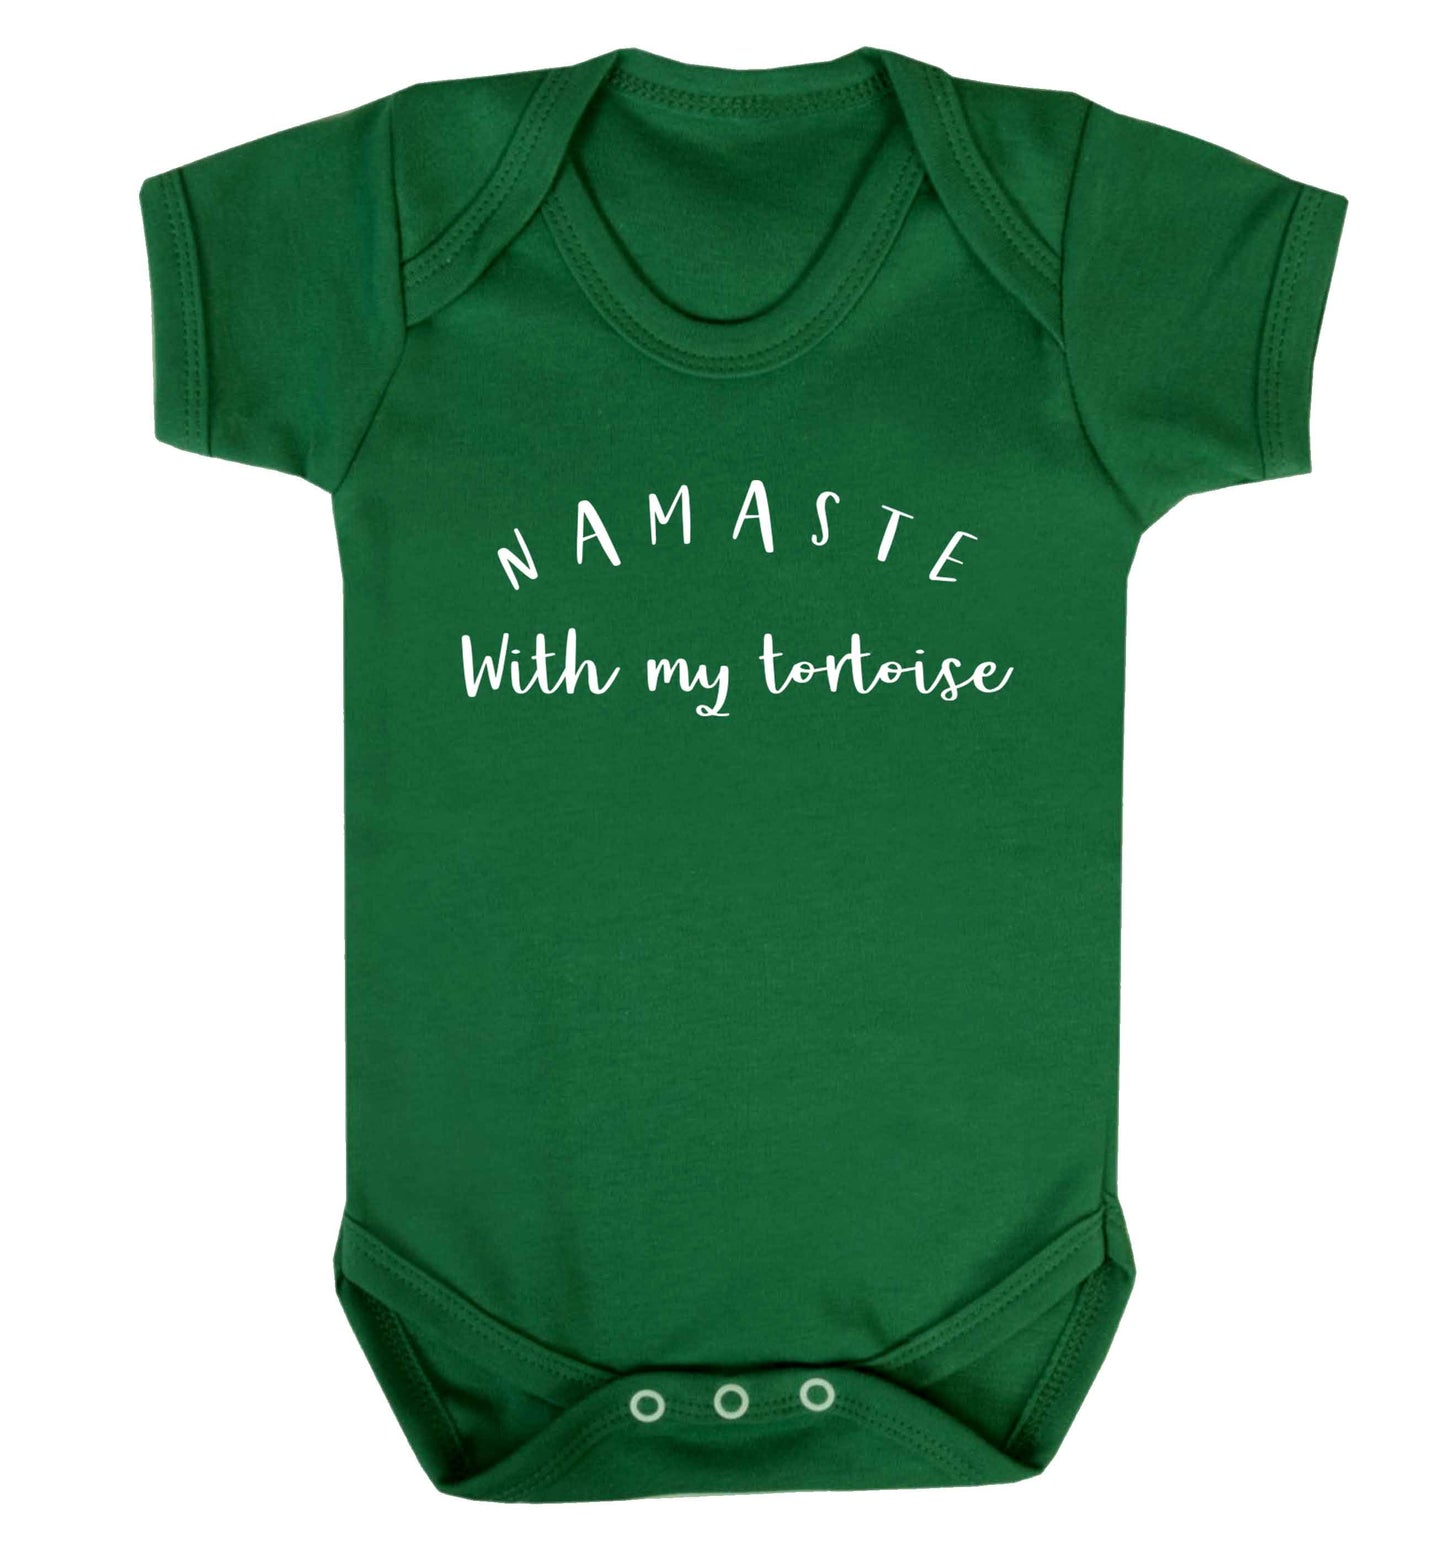 Namaste with my tortoise Baby Vest green 18-24 months